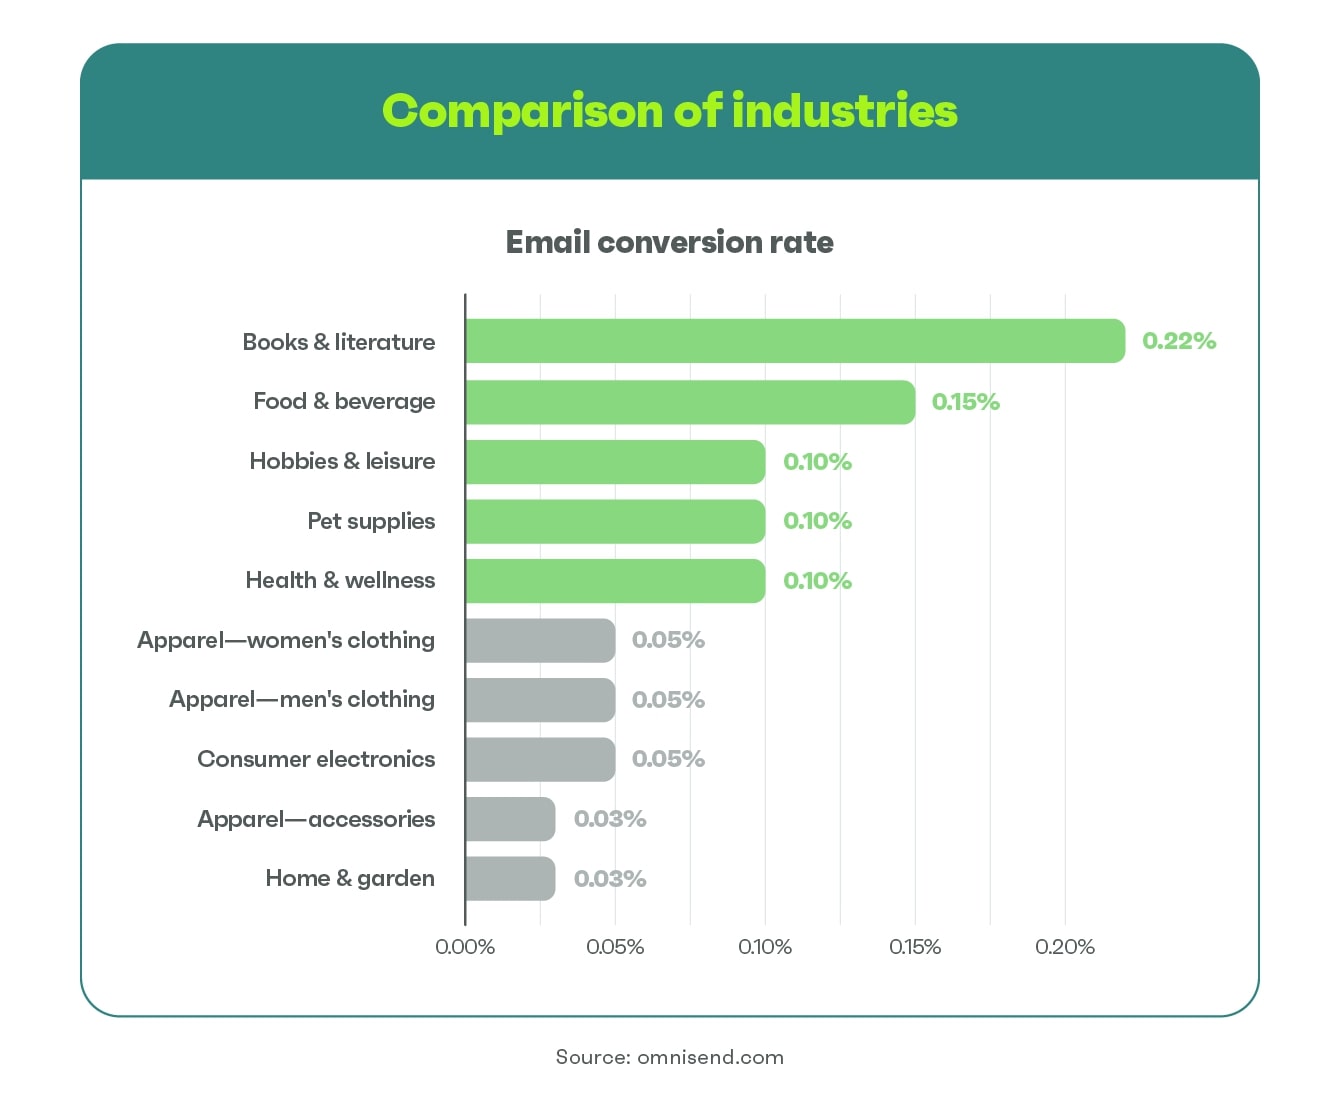 email-conversion-rates